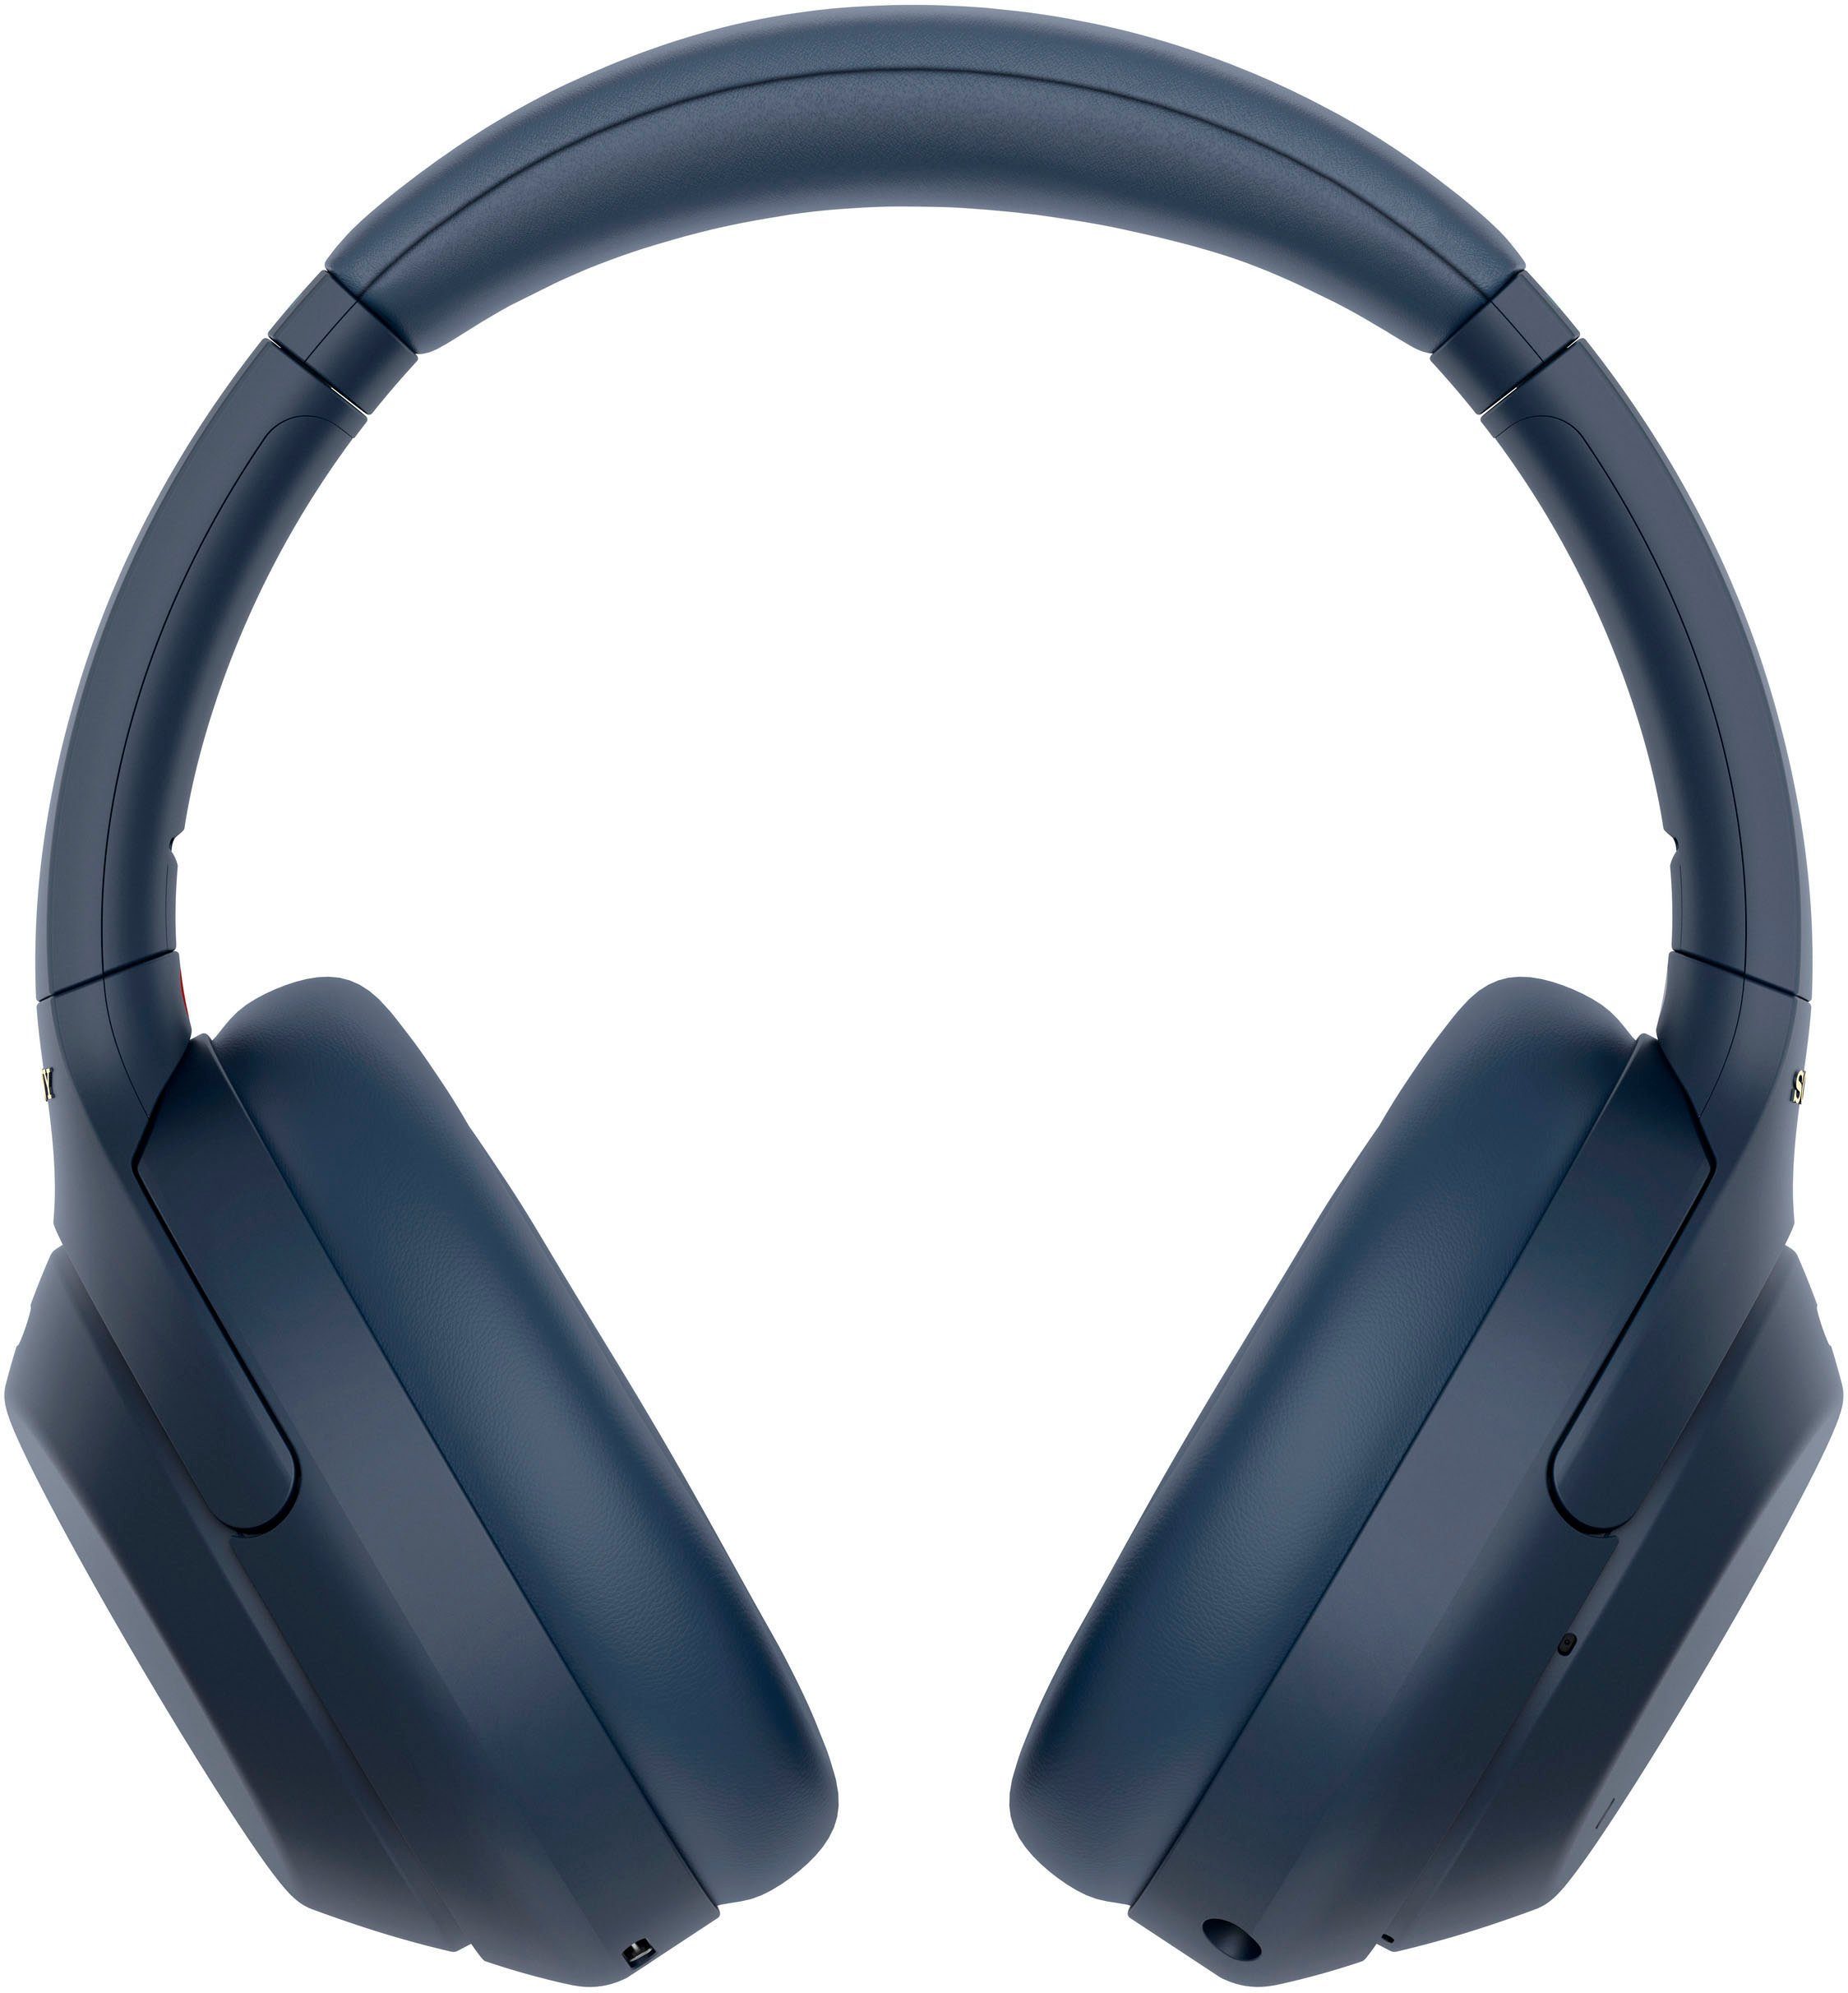 Sony WH-1000XM4 One-Touch via Sensor, blau NFC, Schnellladefunktion) Over-Ear-Kopfhörer Touch (Noise-Cancelling, Bluetooth, NFC, Verbindung kabelloser